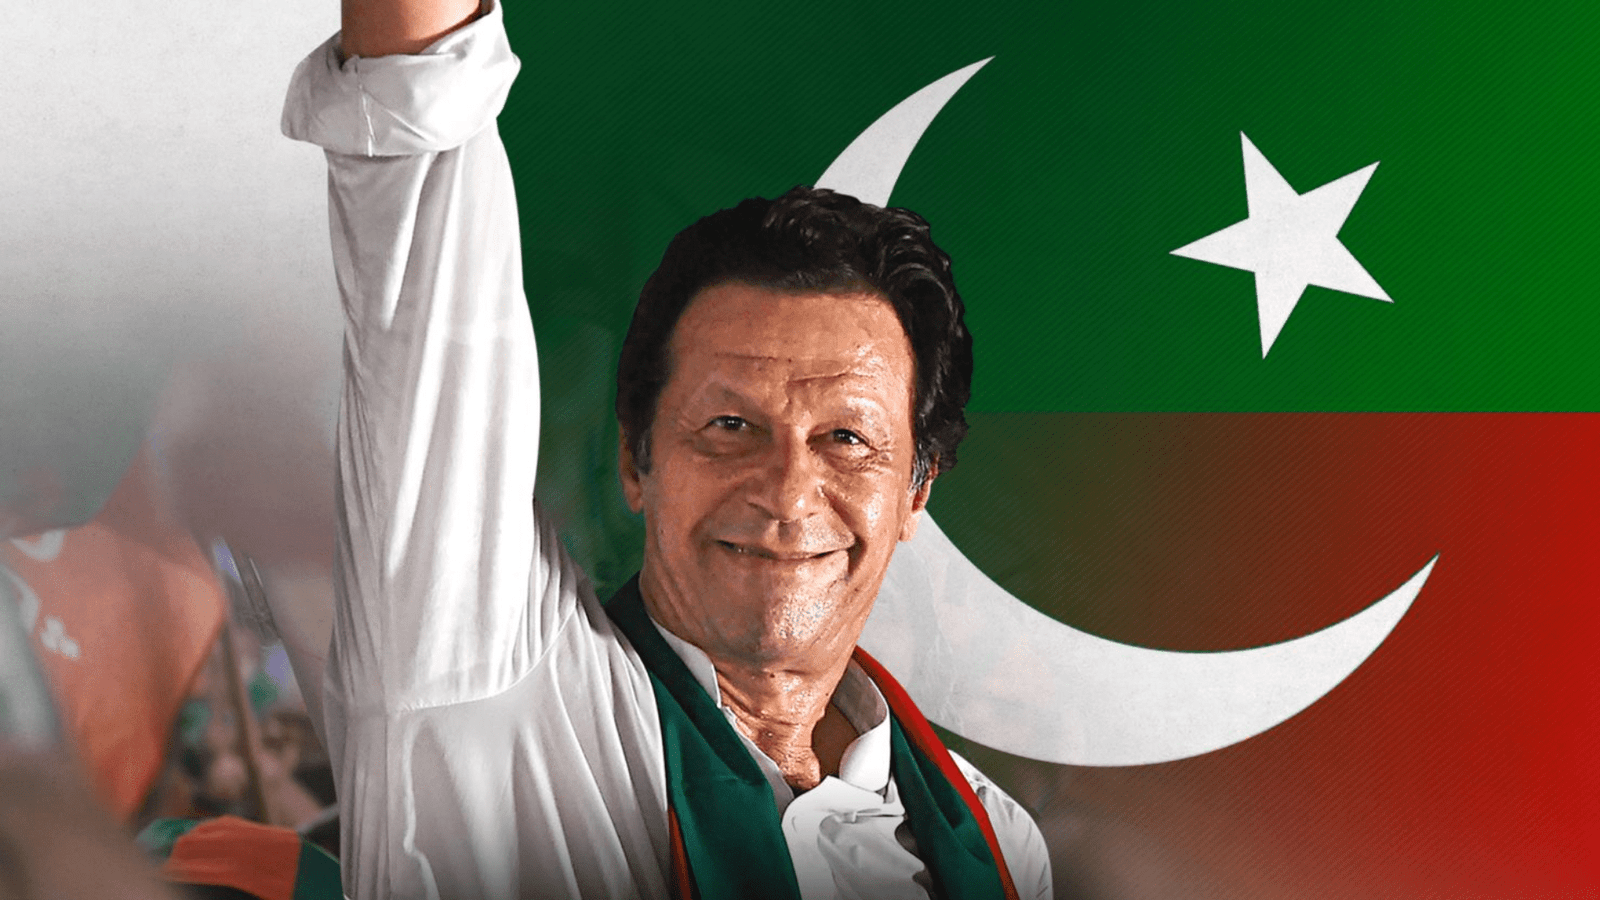 PTI completes ’28 years of struggle’ today